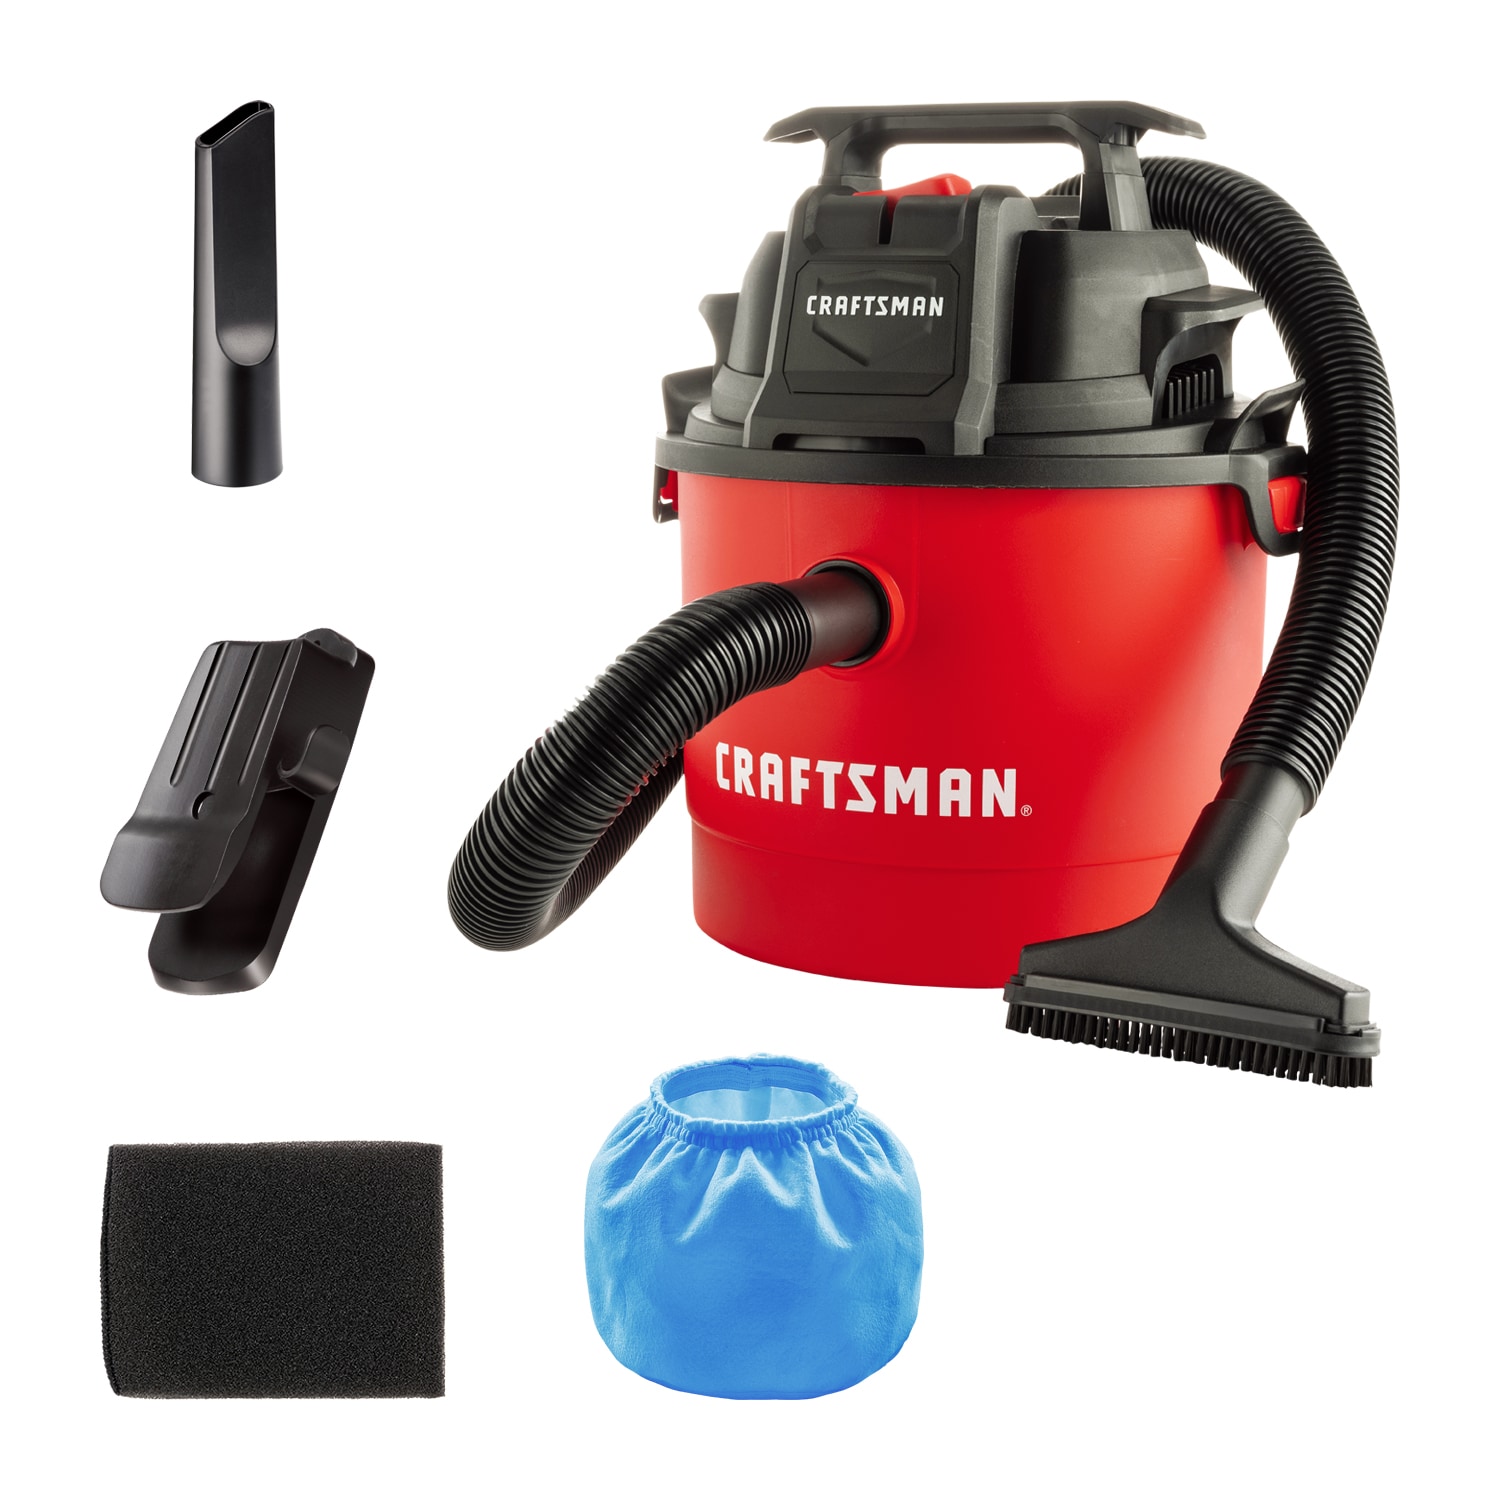 WORKSHOP 1-7/8 in. Wet/Dry Vacuums Attachment Kit, 6 ct. at